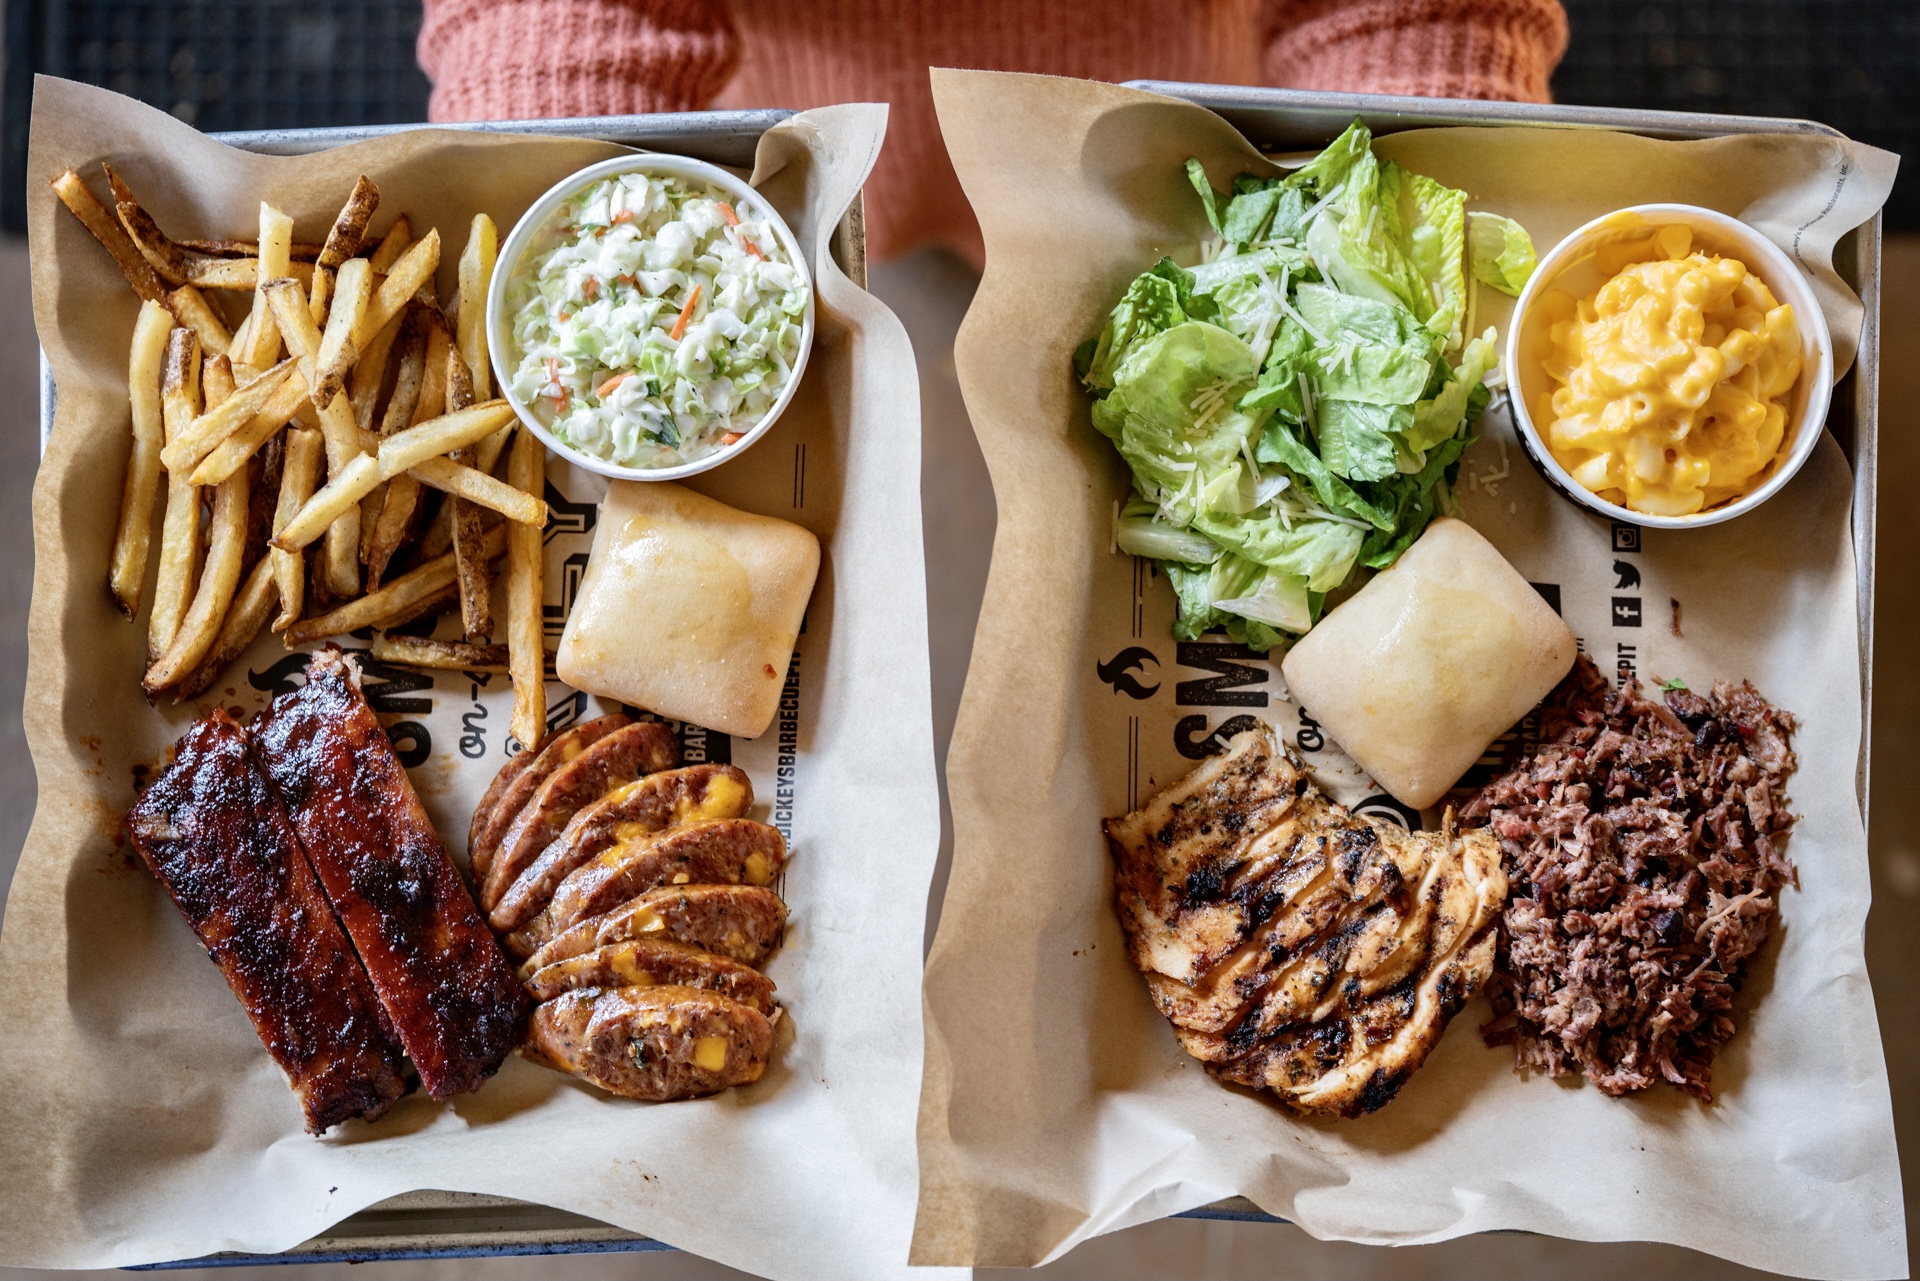 Dickey's Barbecue Pit is offering 2 slow-cooked meats, two side plate, and a buttery roll. You get 2 plates for $24. 